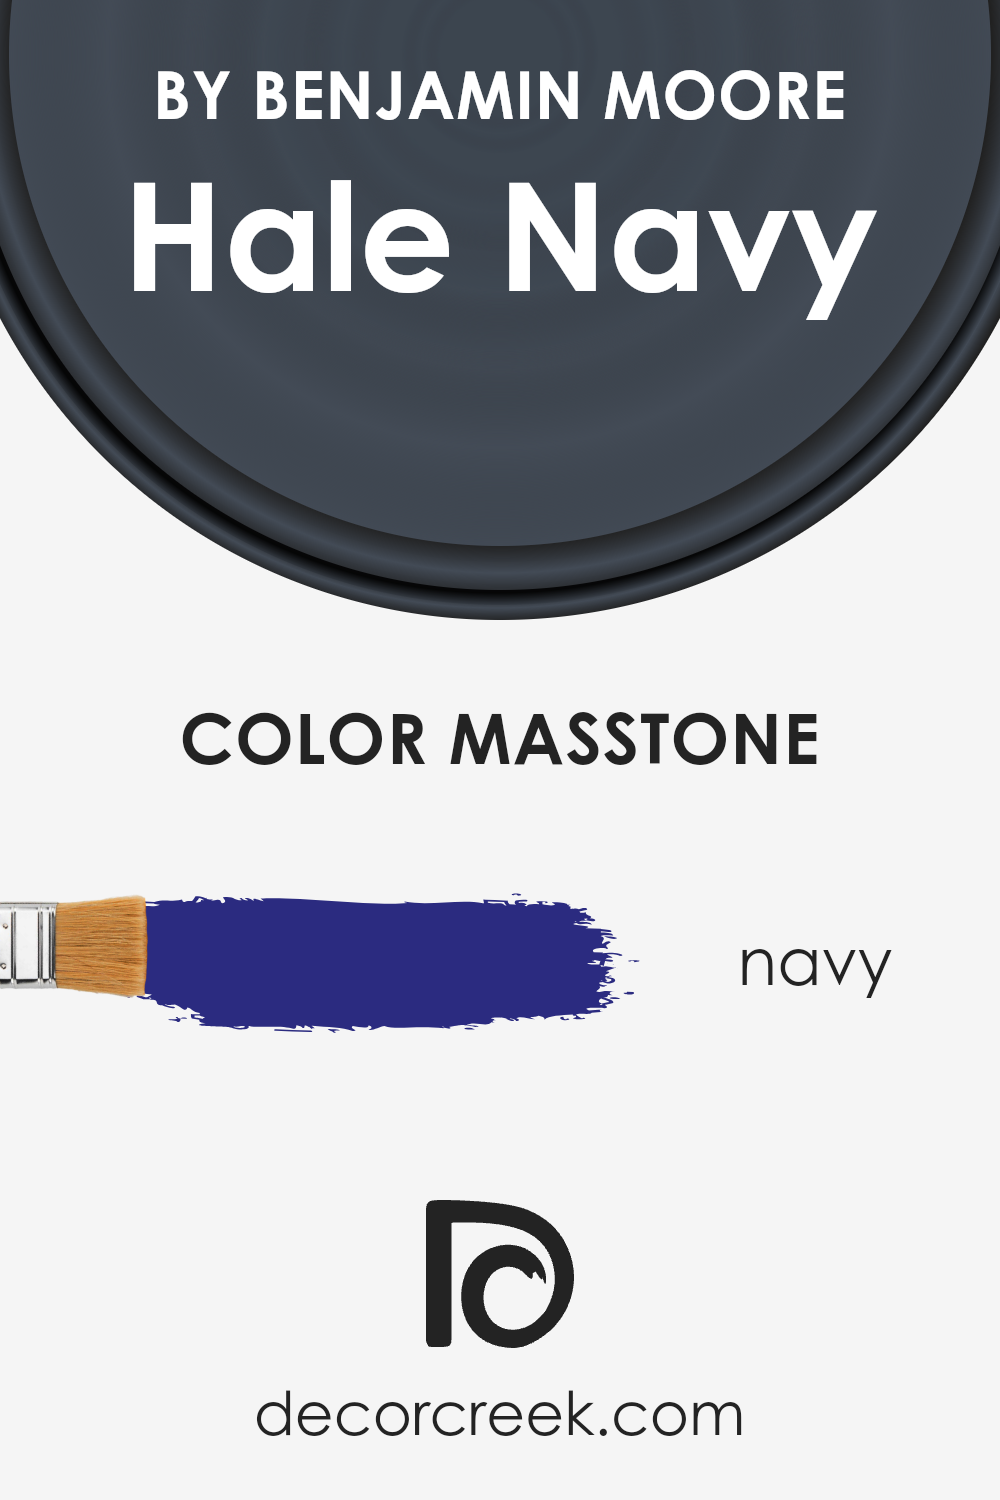 what_is_the_masstone_of_hale_navy_hc_154